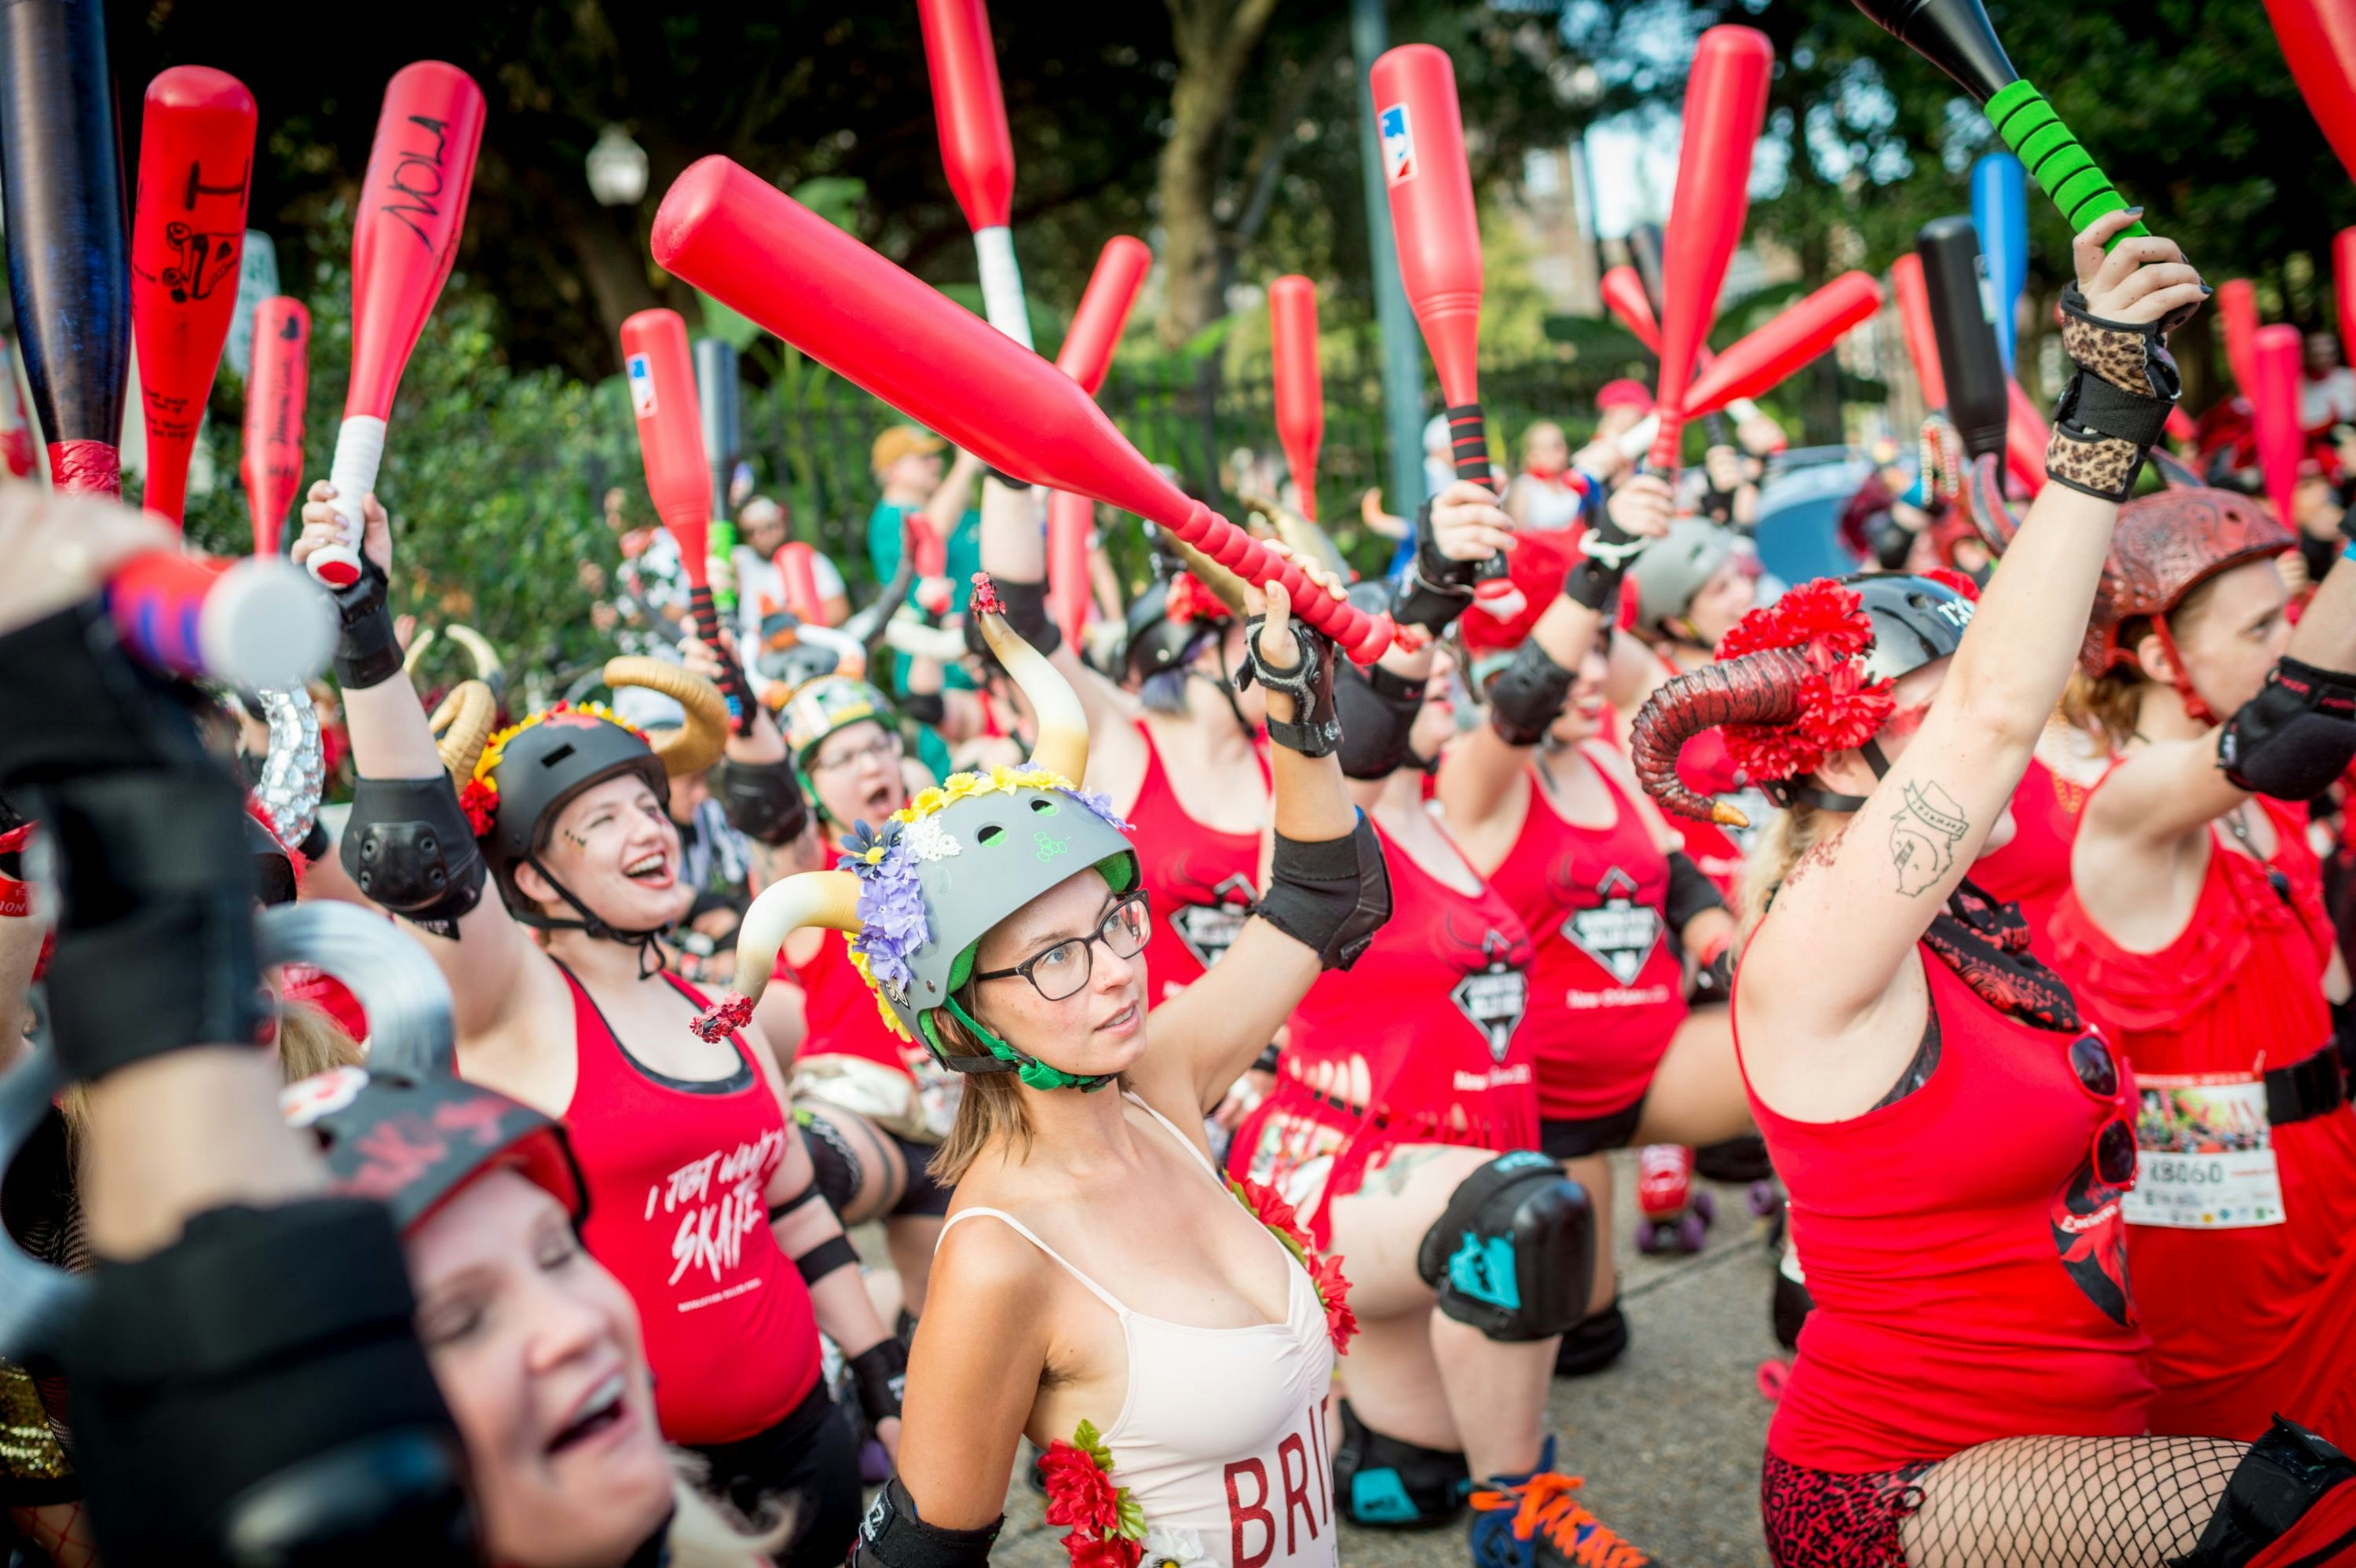 A large group of women, some wearing helmets with horns hold up red plastic bats while wearing roller skates during the annual Running of the Bulls in New Orleans. 